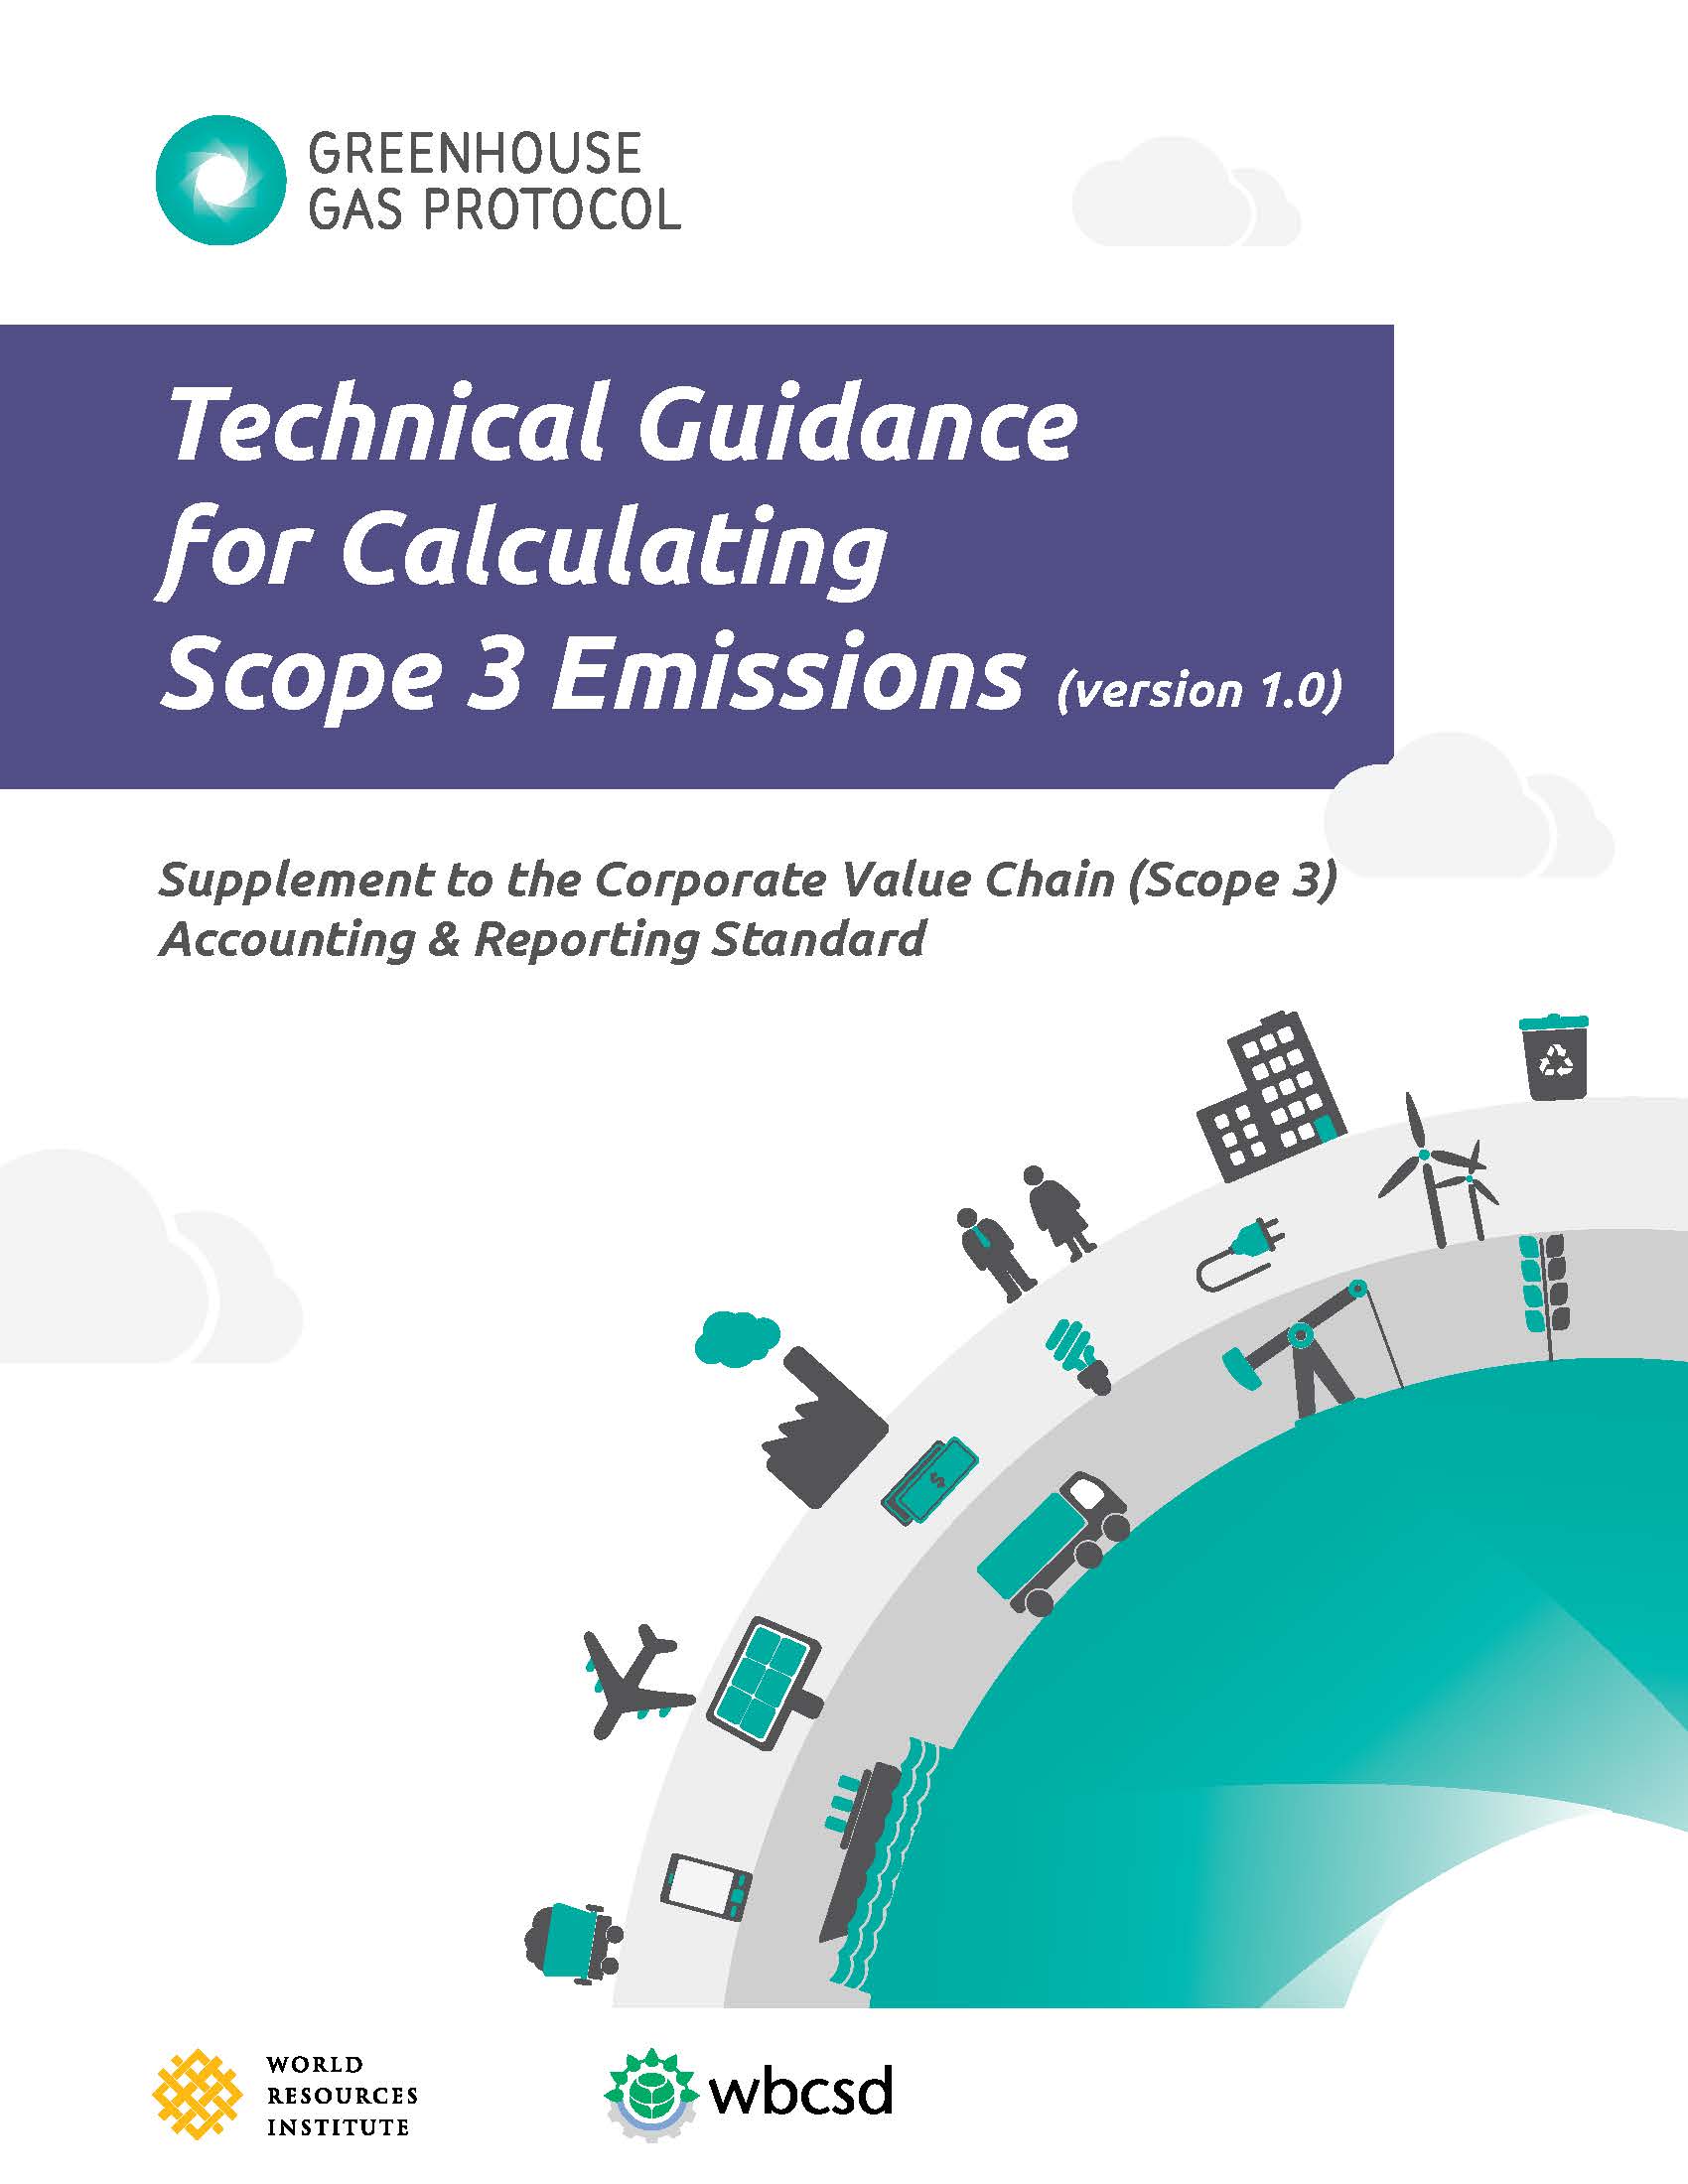 New guidance makes corporate value chain accounting easier